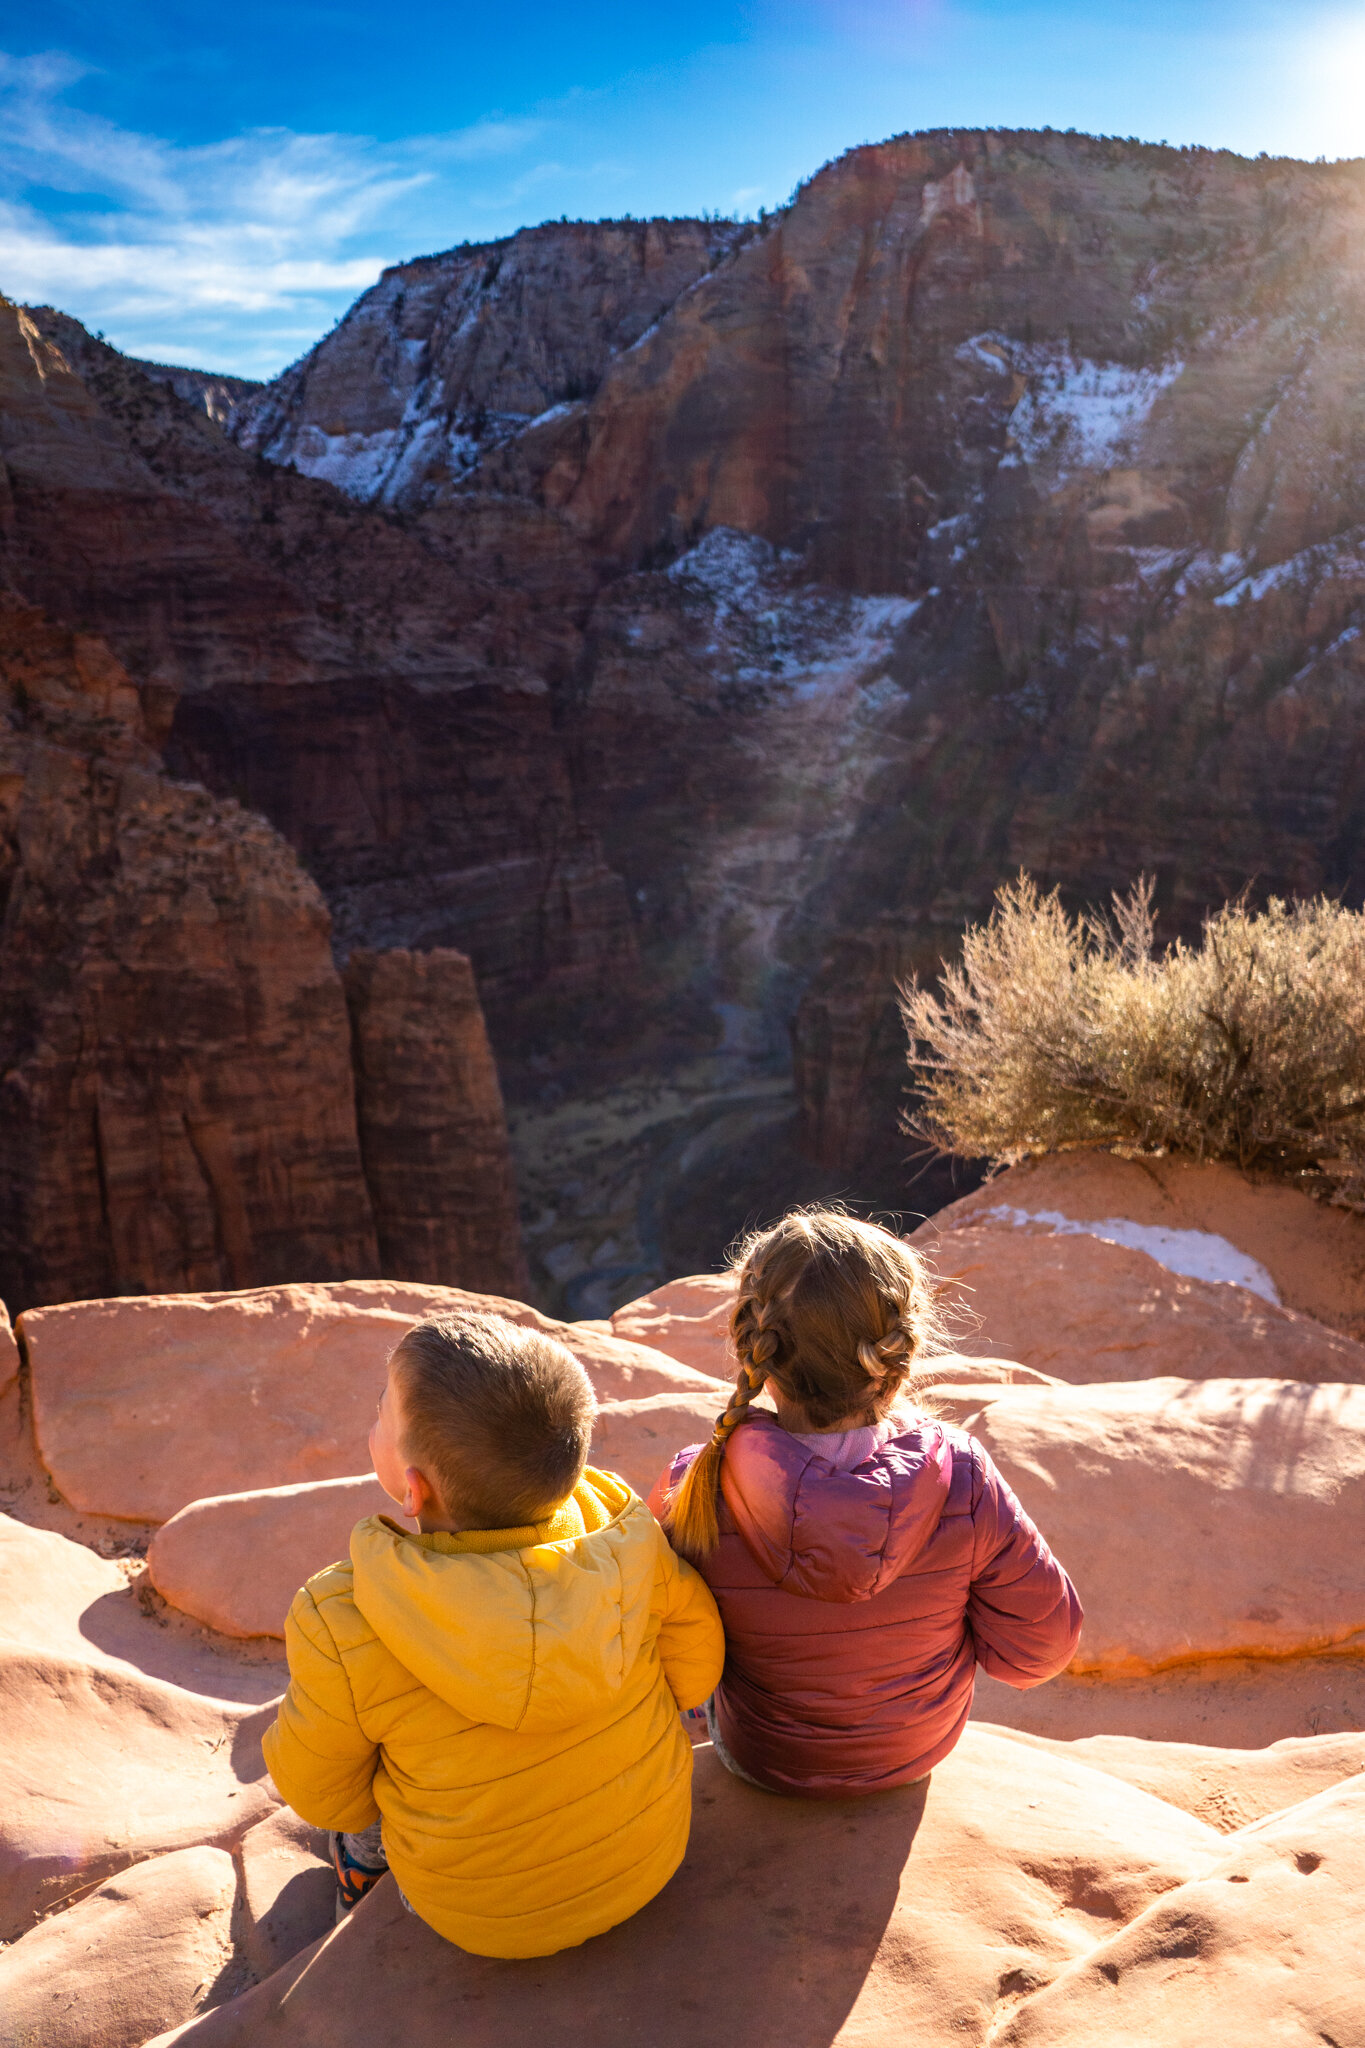 The kids sitting overlooking scout lookout which is the entry point to angels landing